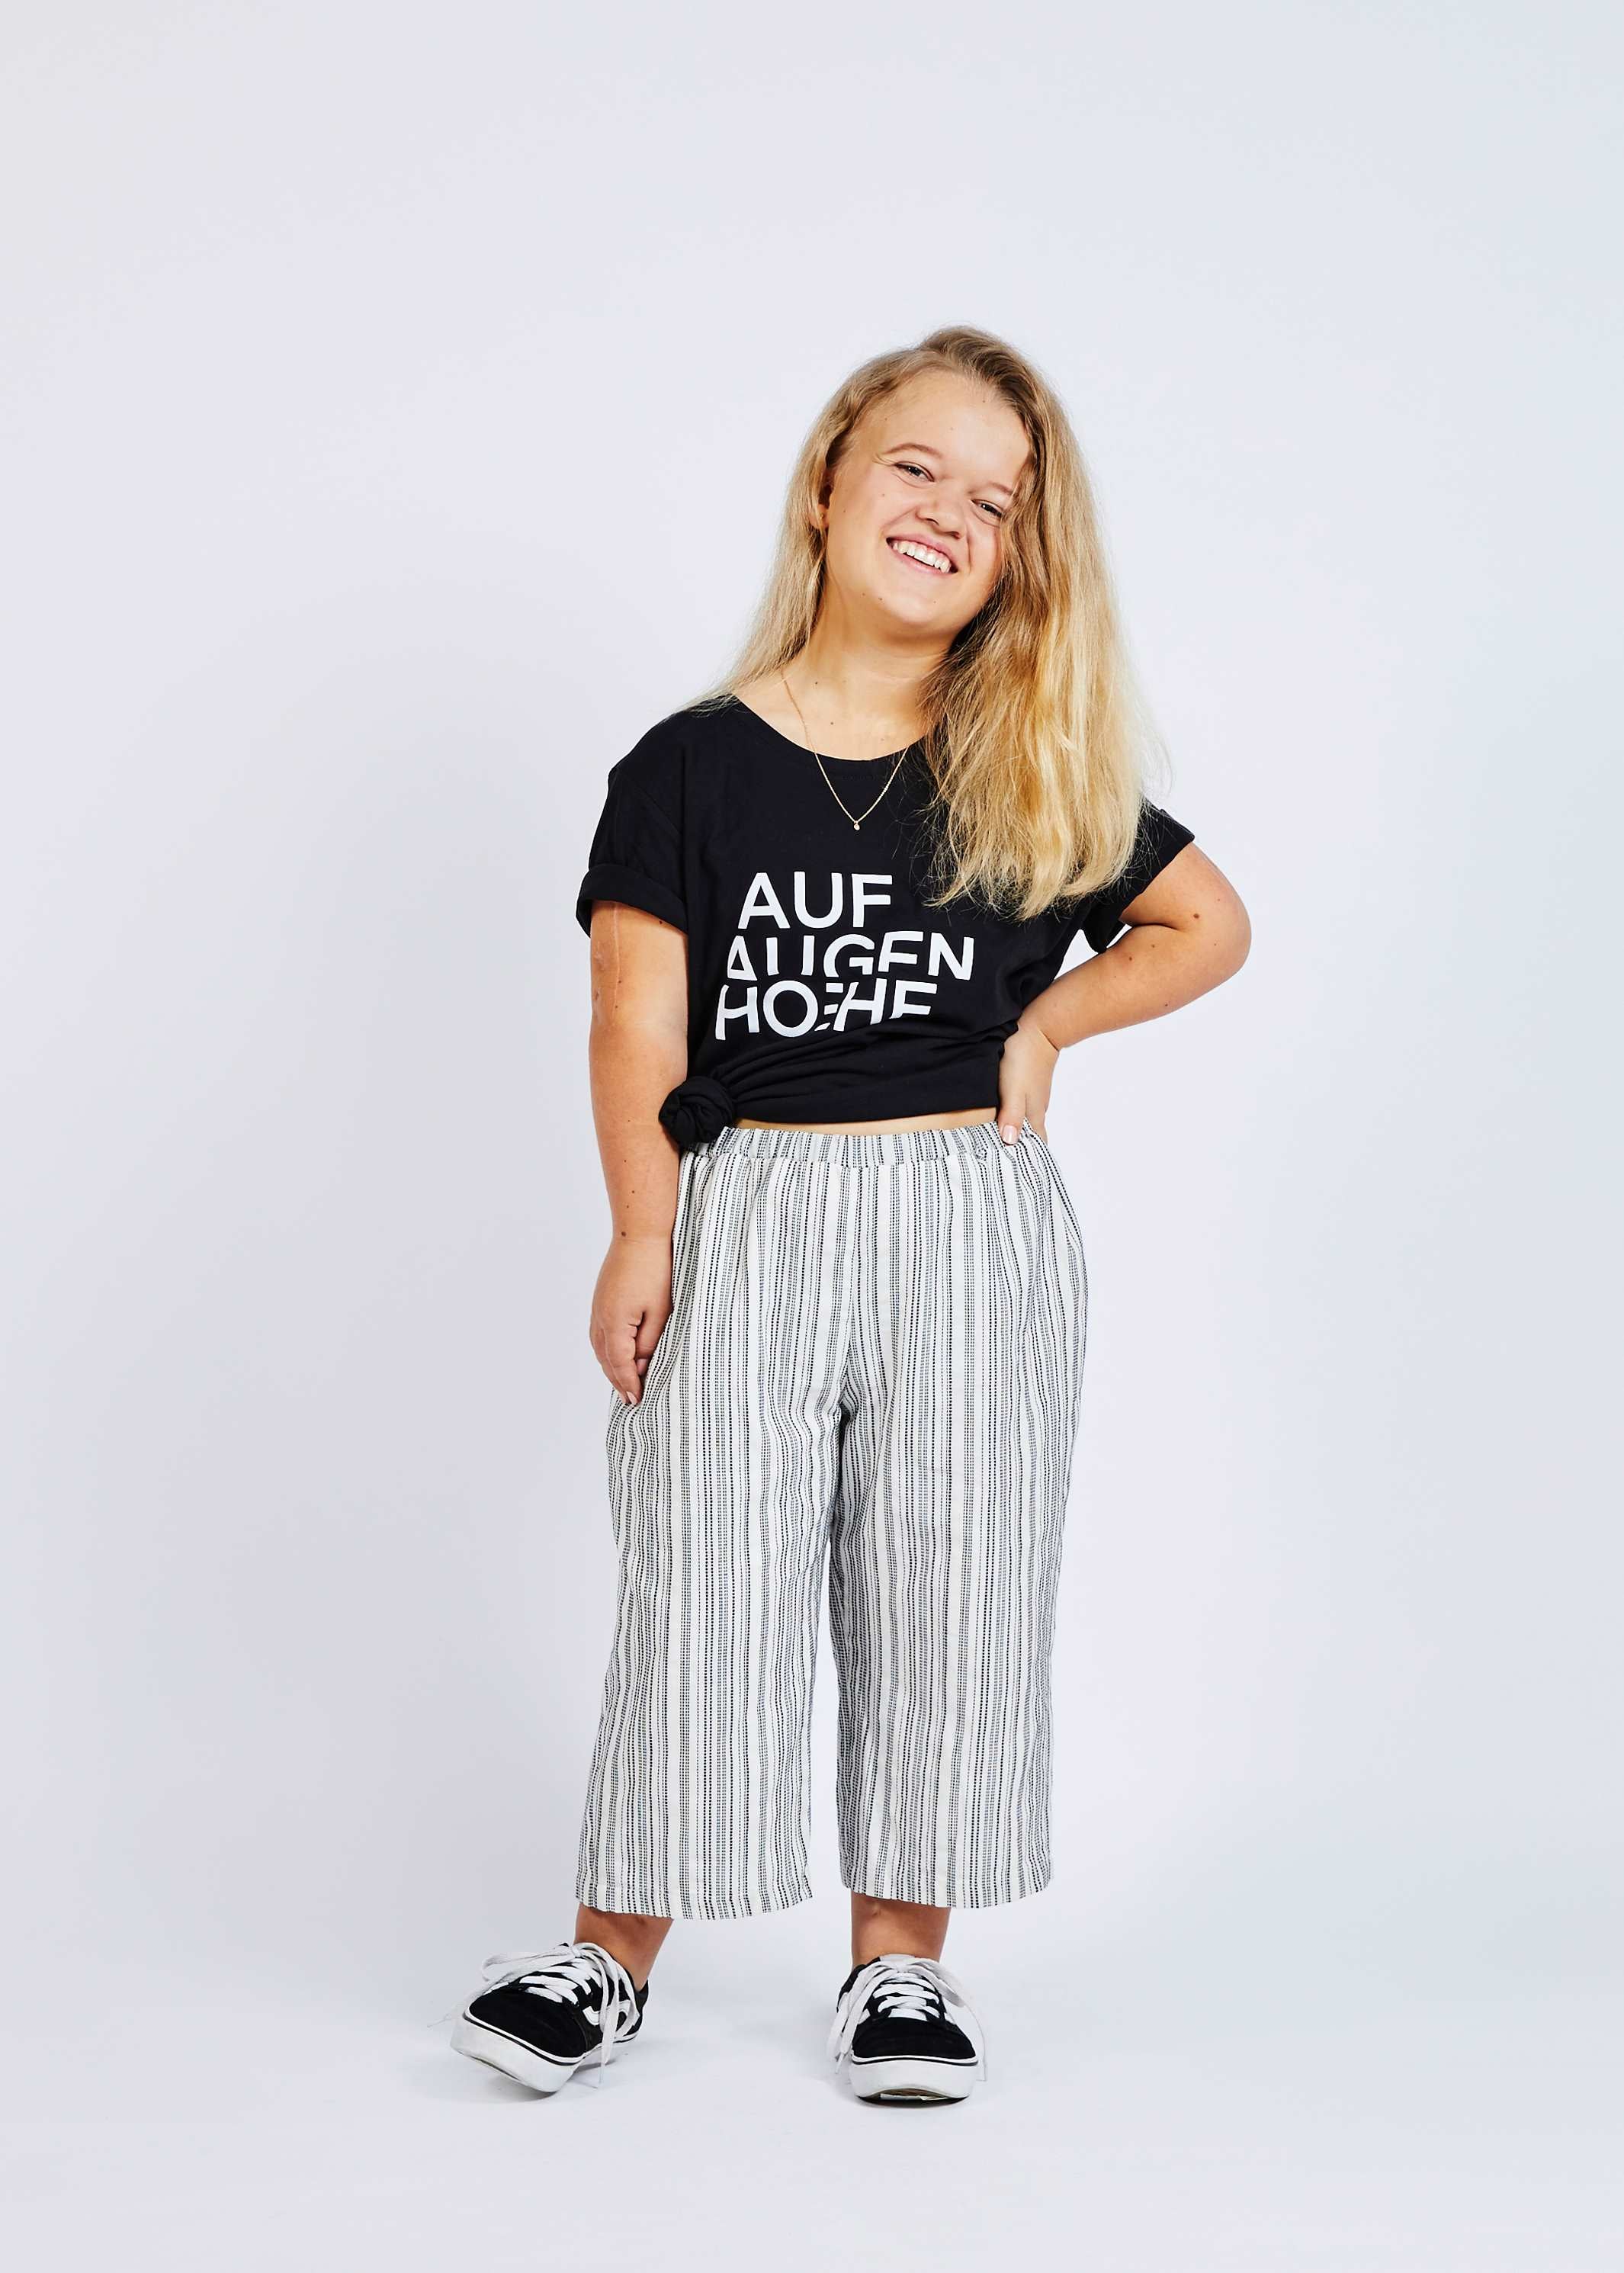 woman with dwarfism wearing black and white striped pants and black t-shirt